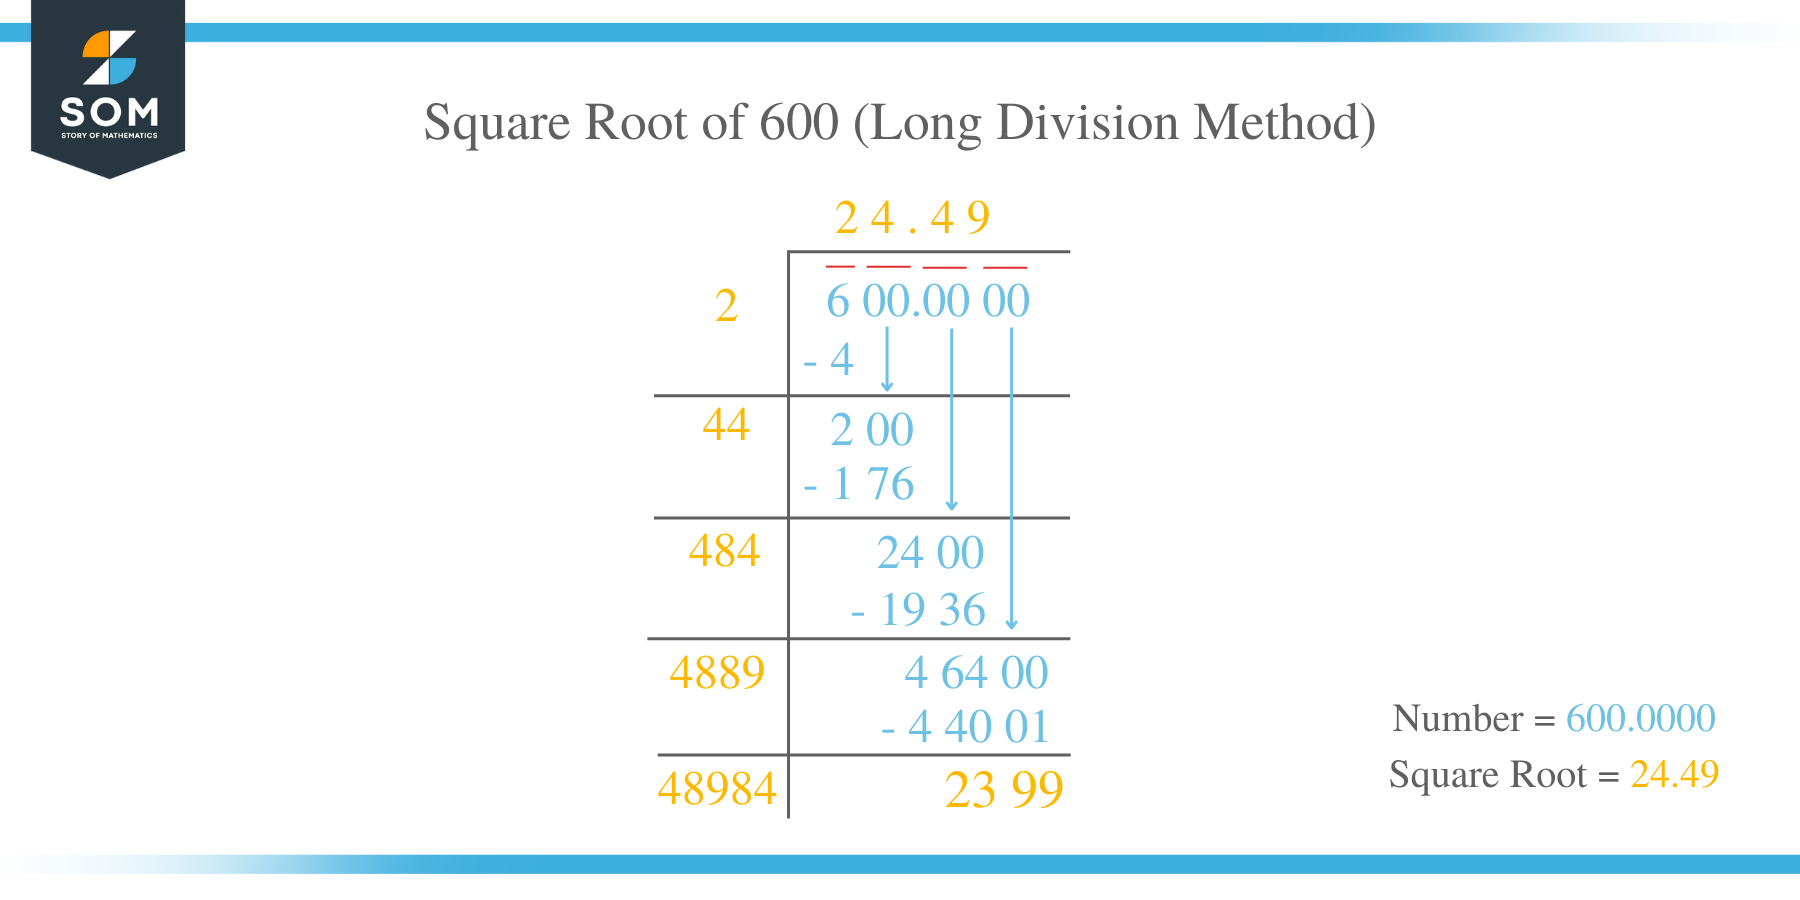 Square Root of 600 by Long Division Method